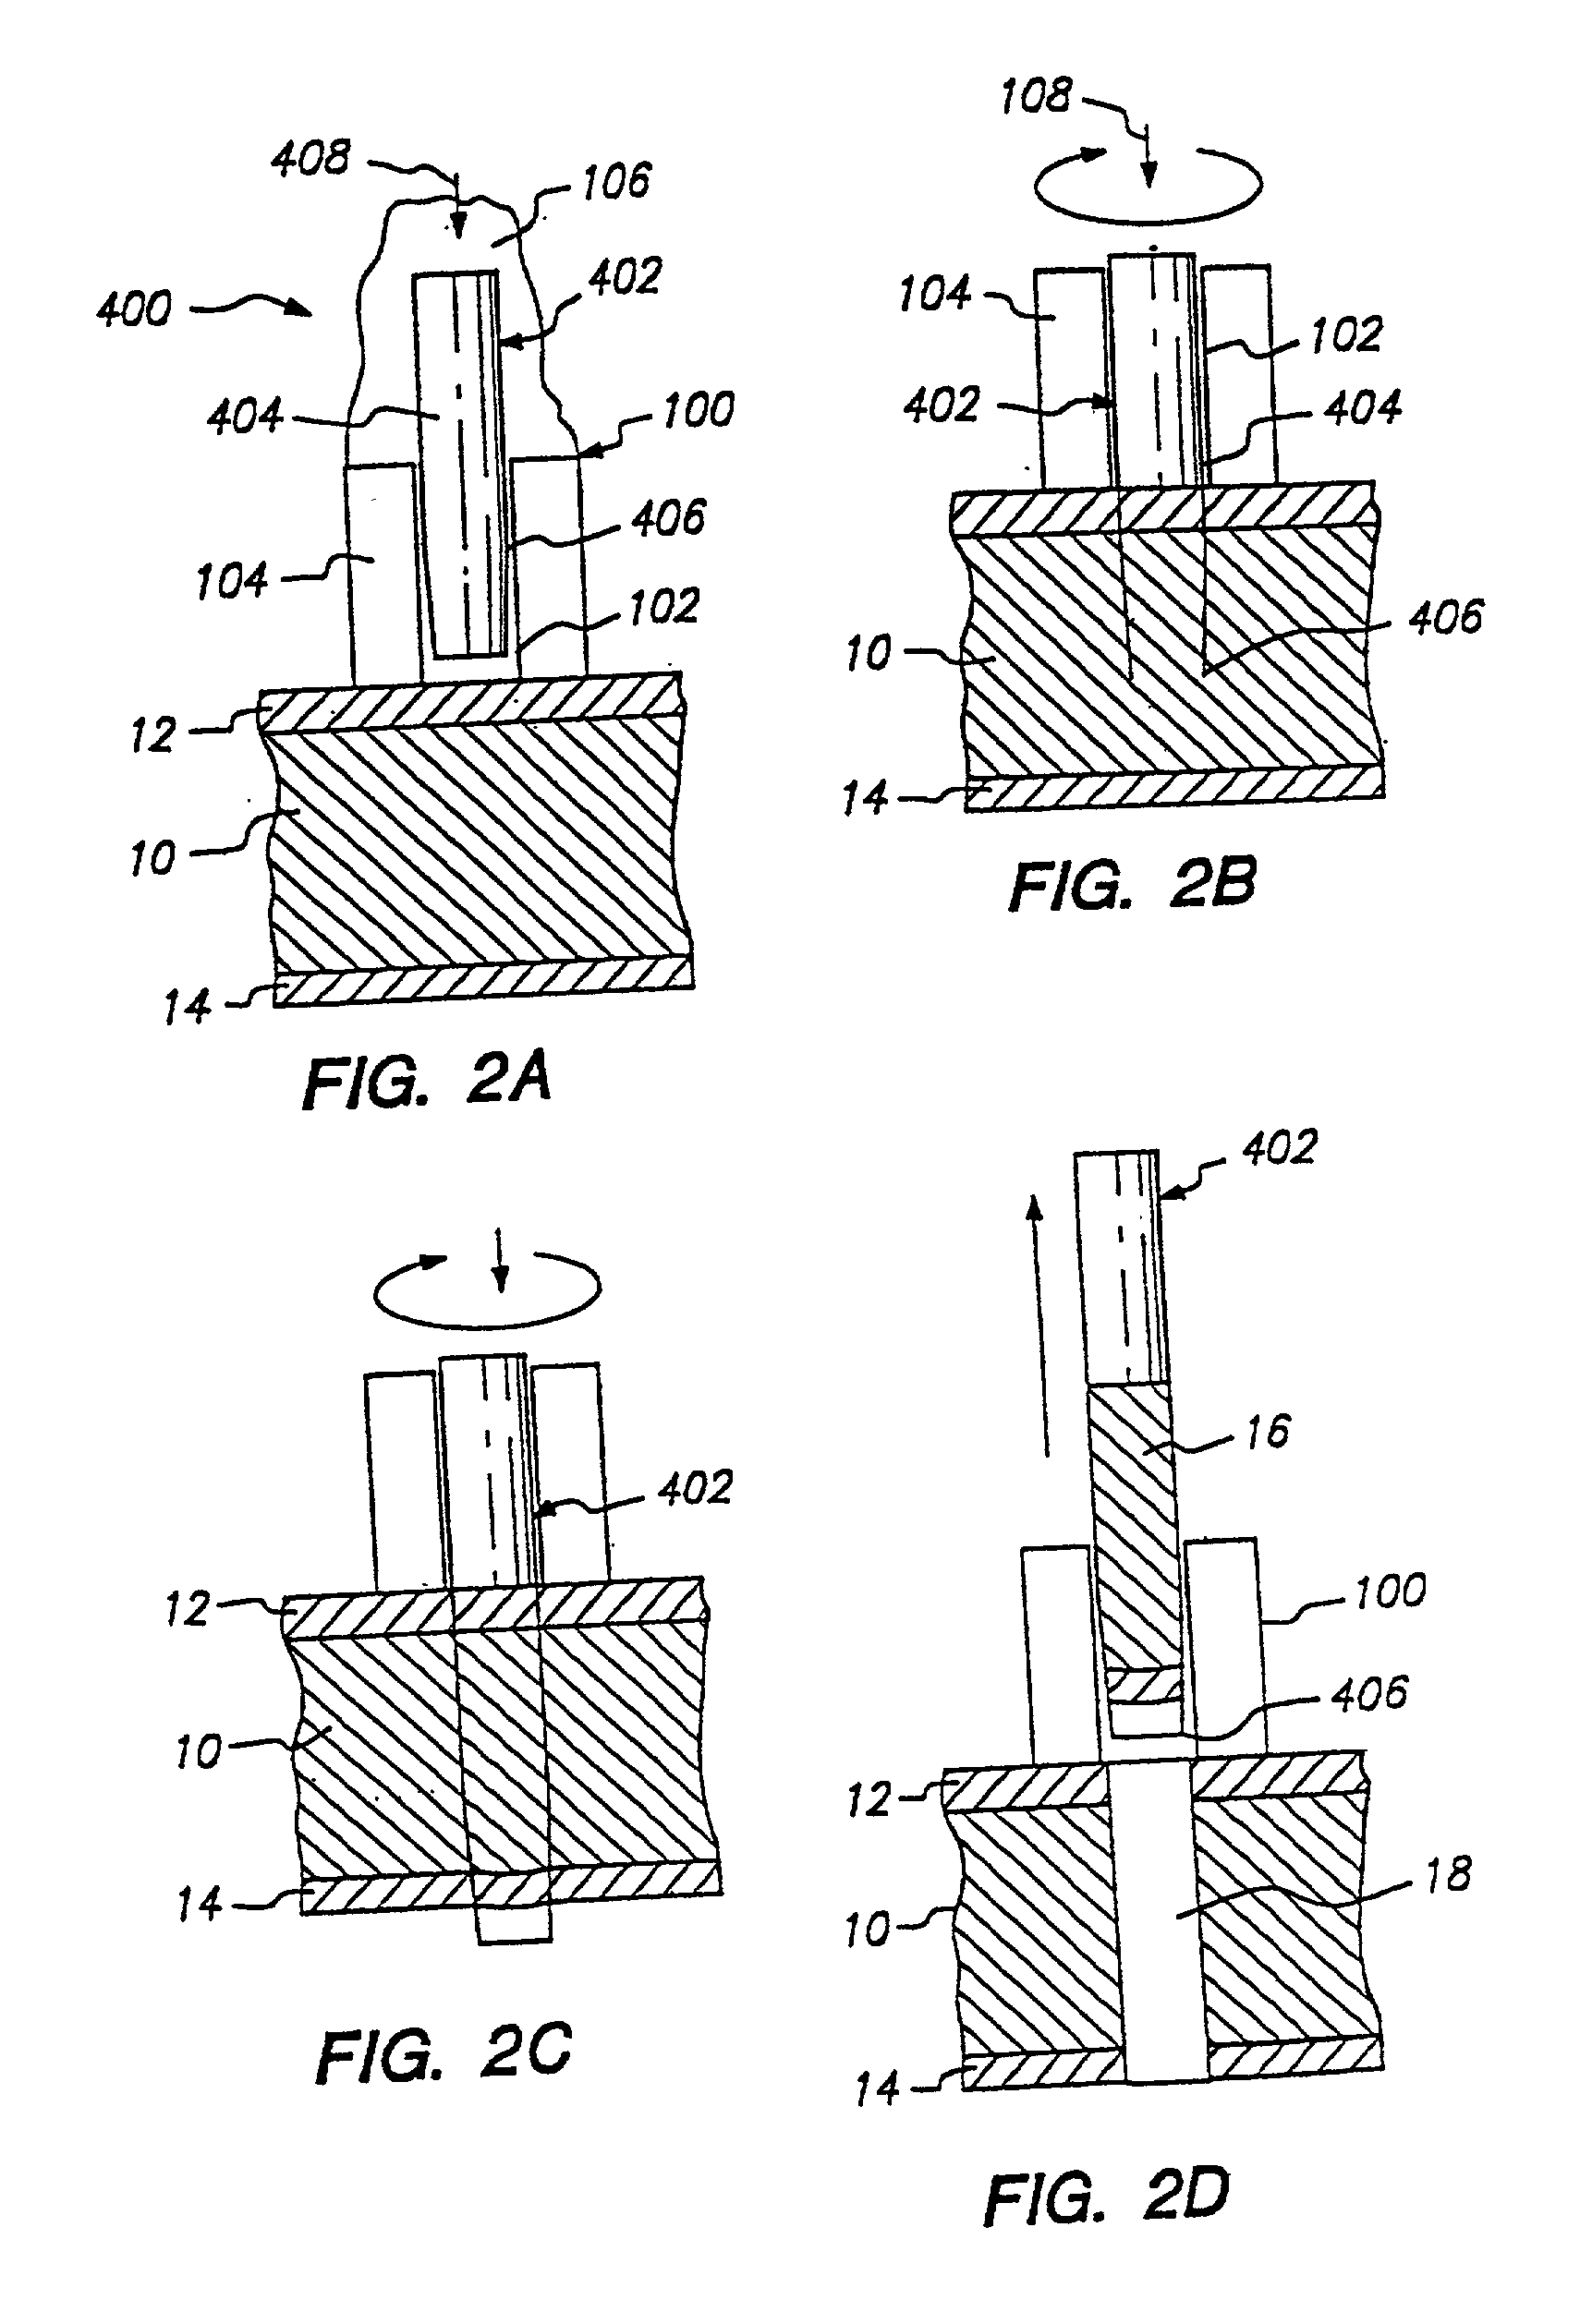 Method and apparatus for mechanical transmyocardial revascularization of the heart